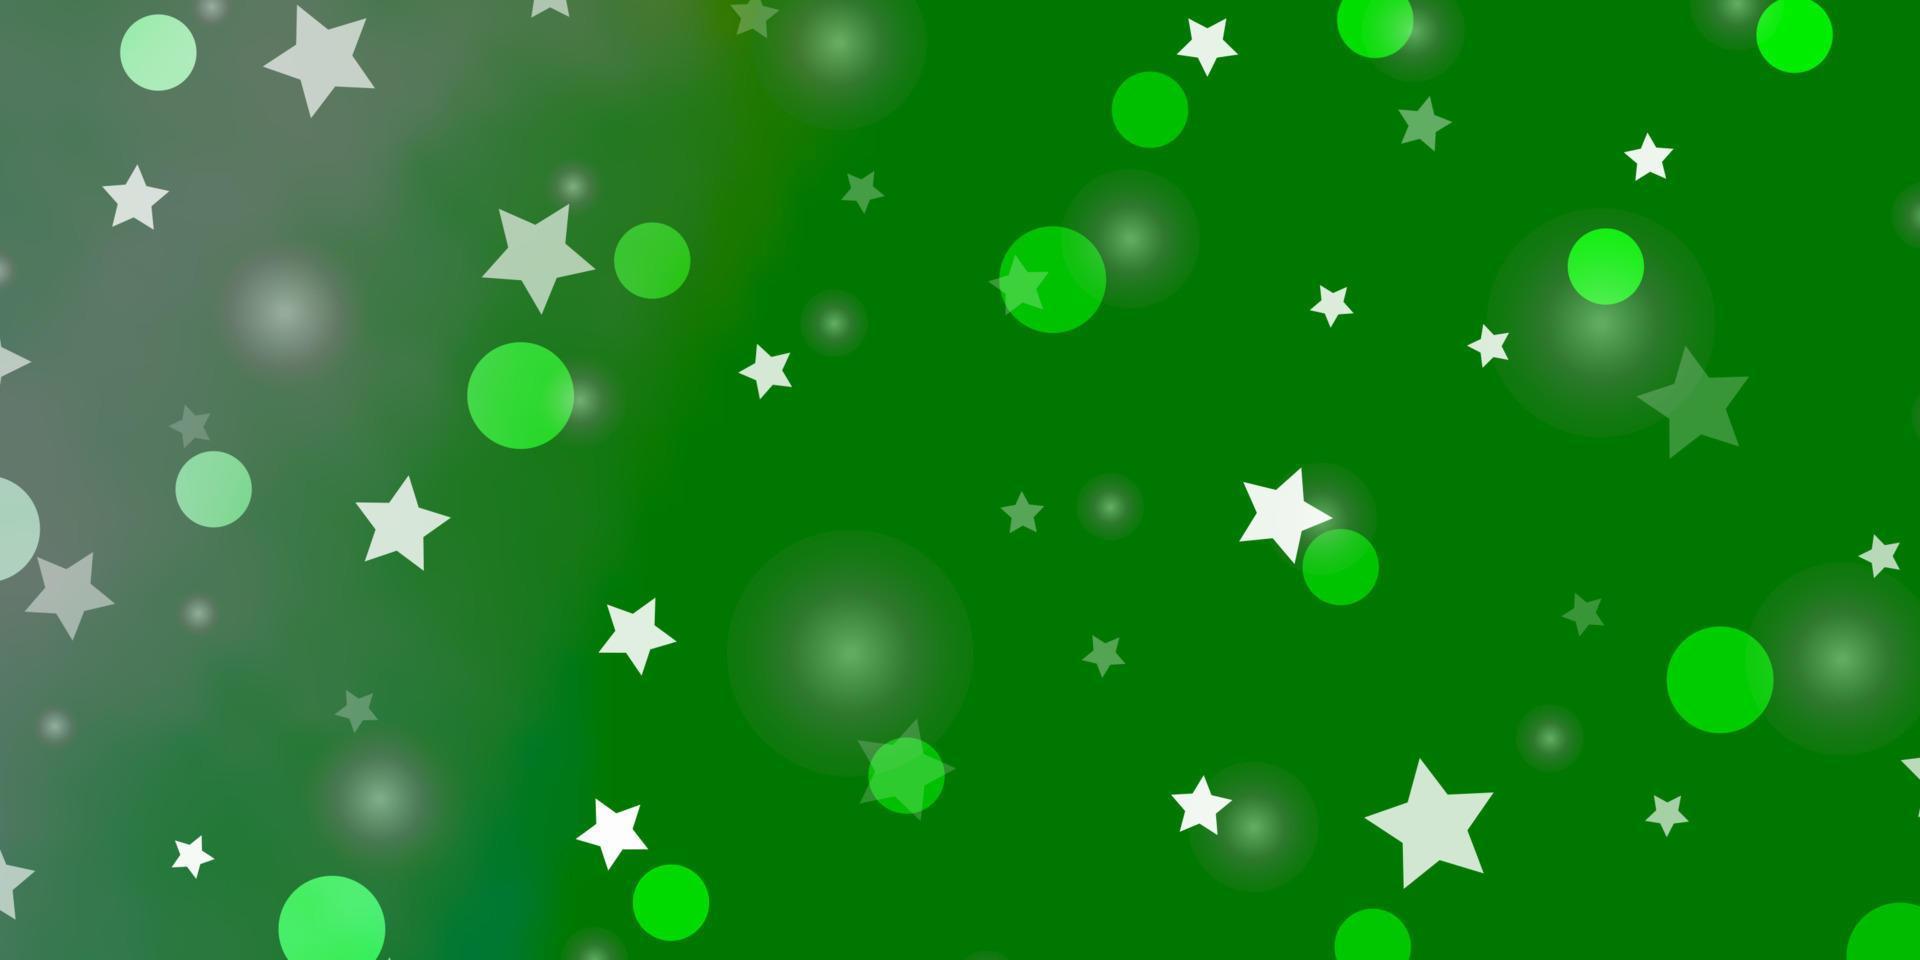 Light Green vector background with circles, stars.